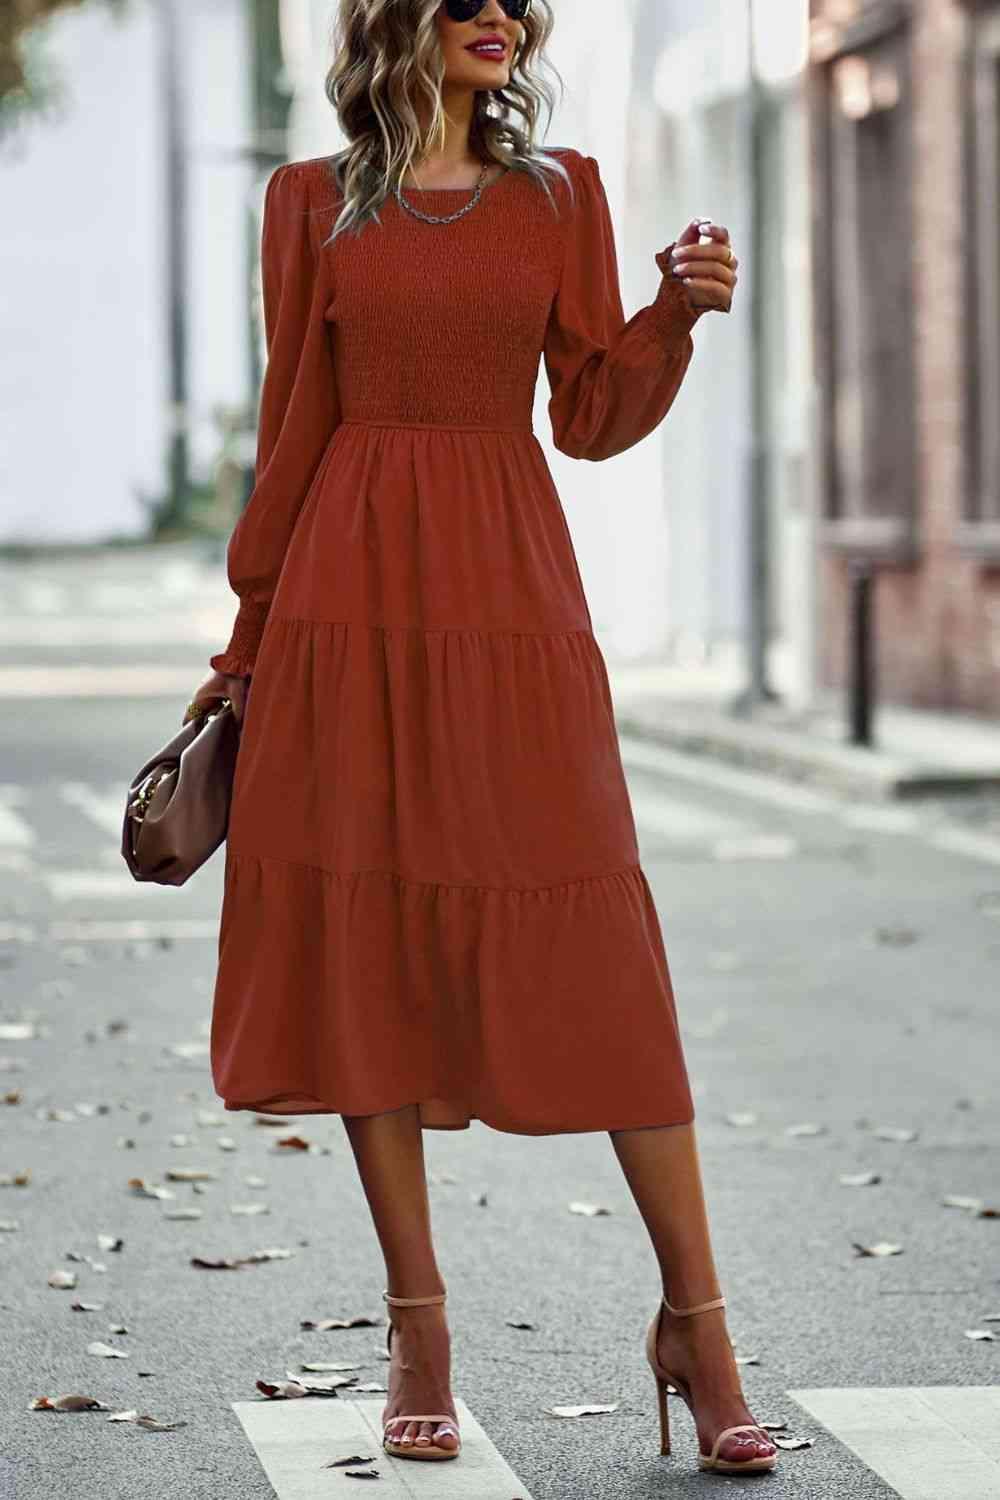 a woman in a red dress is standing on the street